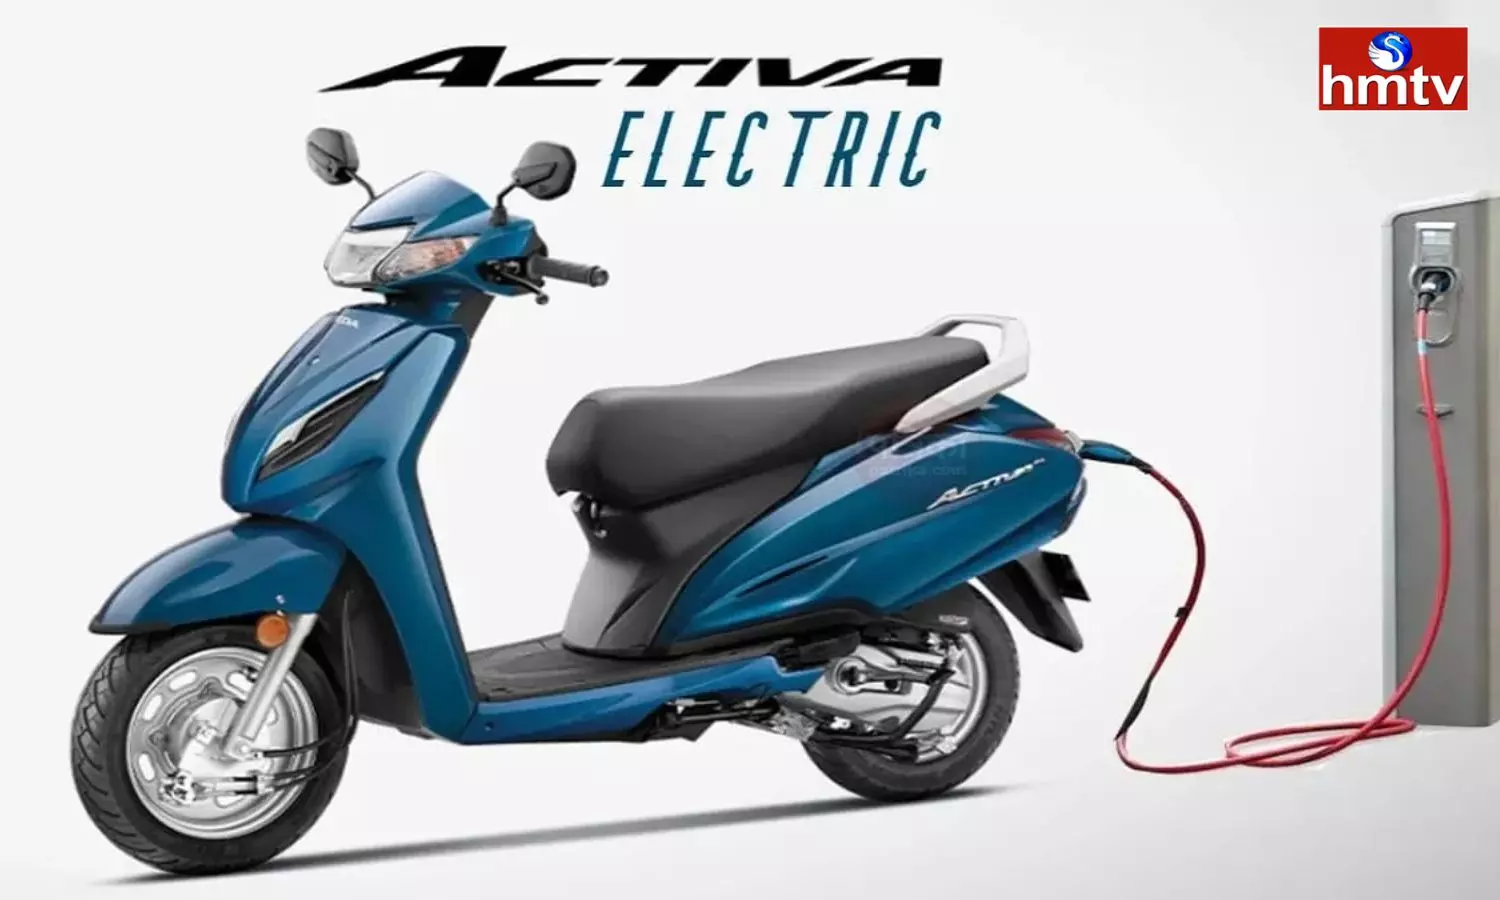 Honda Activa Electric Will Be Launched At The Consumer Electronics Show on January 2024